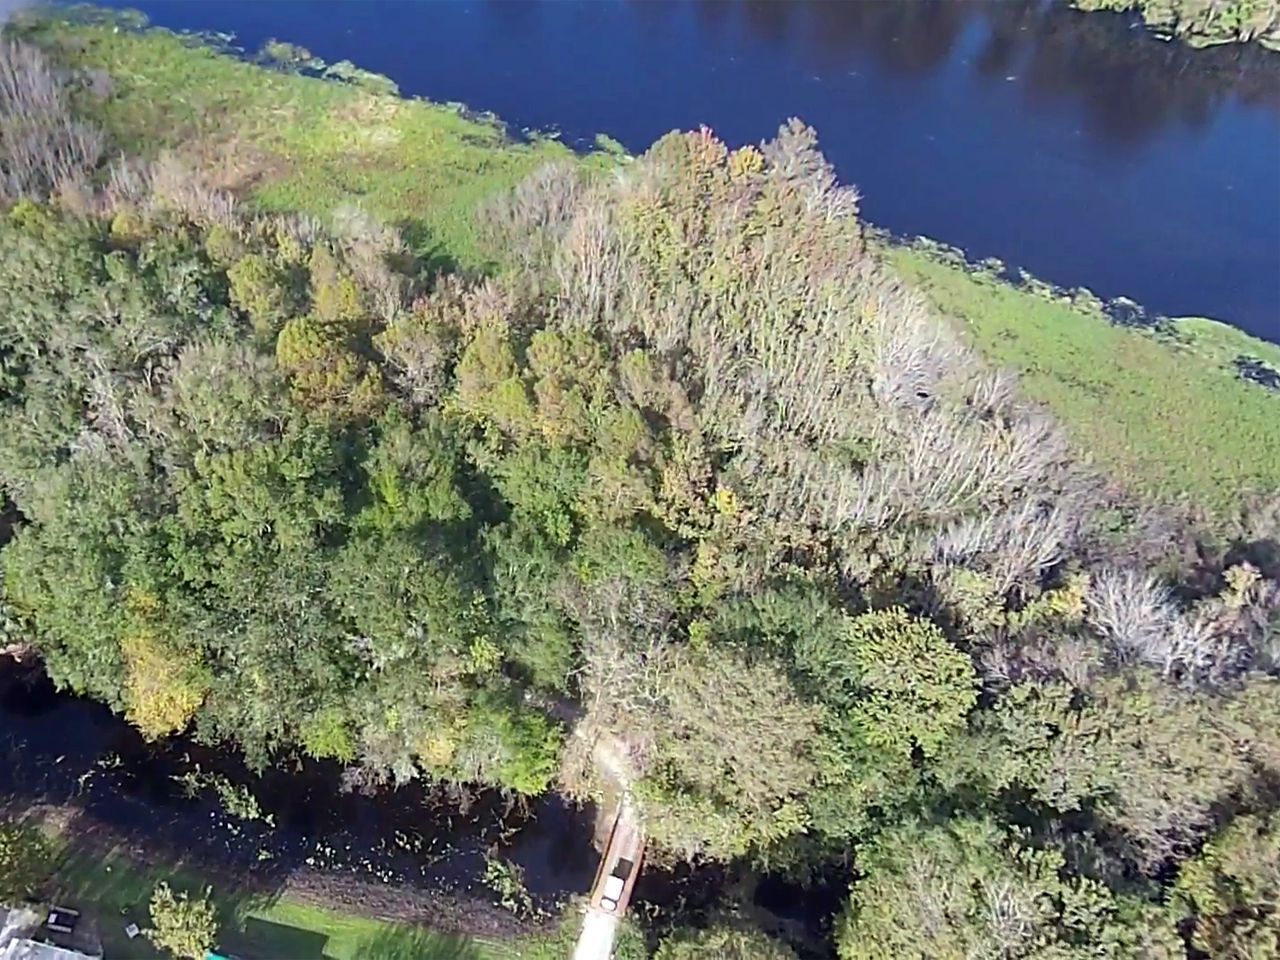 an aerial view of a river surrounded by trees and grass